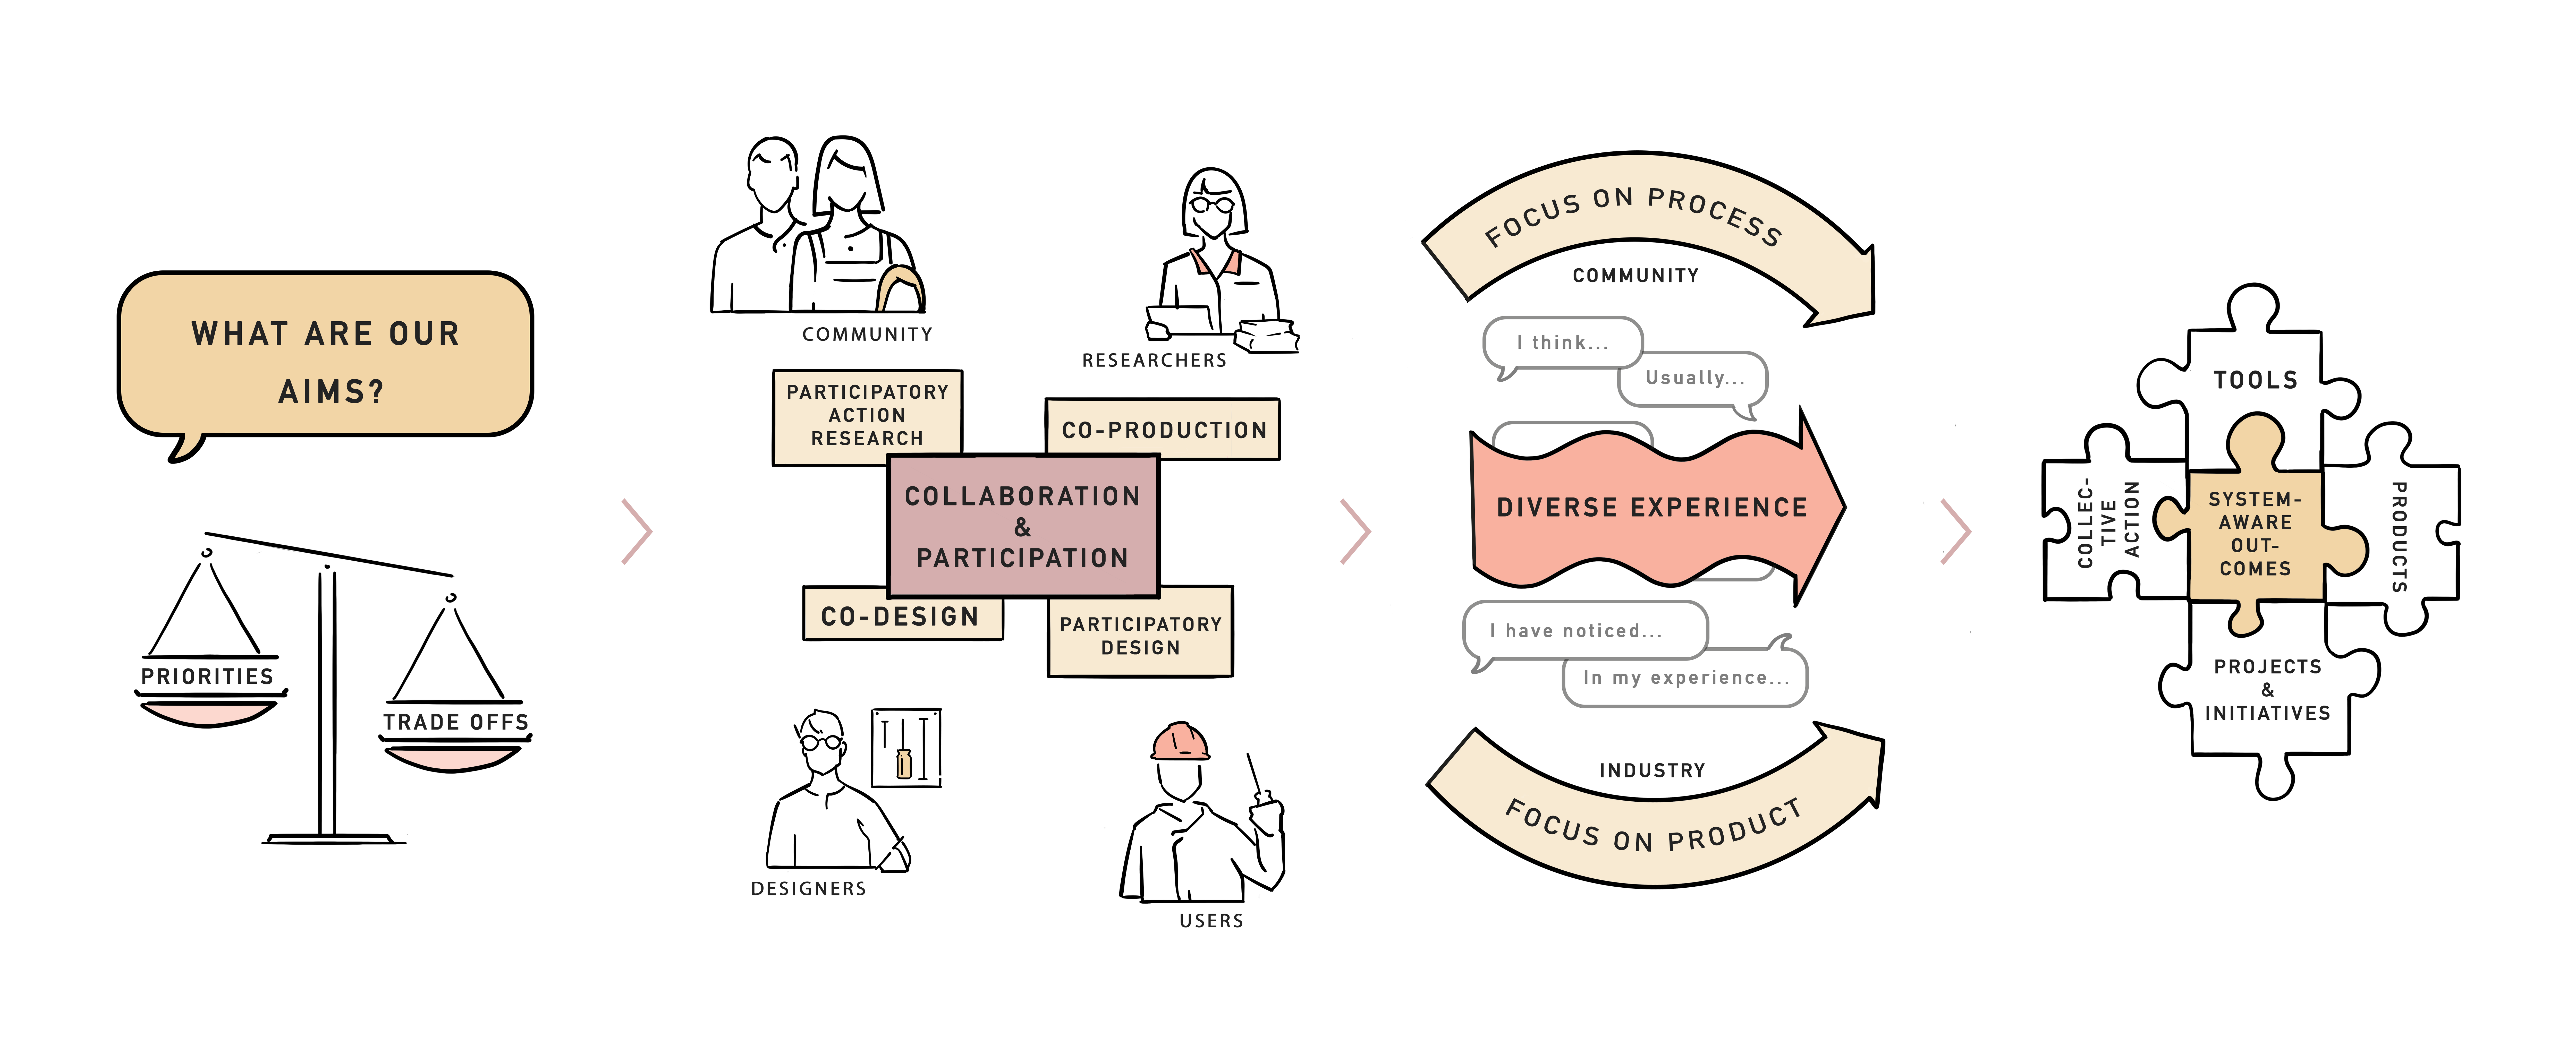 This illustration depicts the co-designing process as imagined by the authors of the blog. Starting with analyzying aims and weighing priorities versus tradeoffs then flowing to the right on the diagram to collaboration and participation. Here the stakeholders are represented by sketches: community, researchers, designers and users. The next section to the right illustrates conversation on diverse experience, focus on process, focus on product, the last section on the right is an interlocking puzzle.